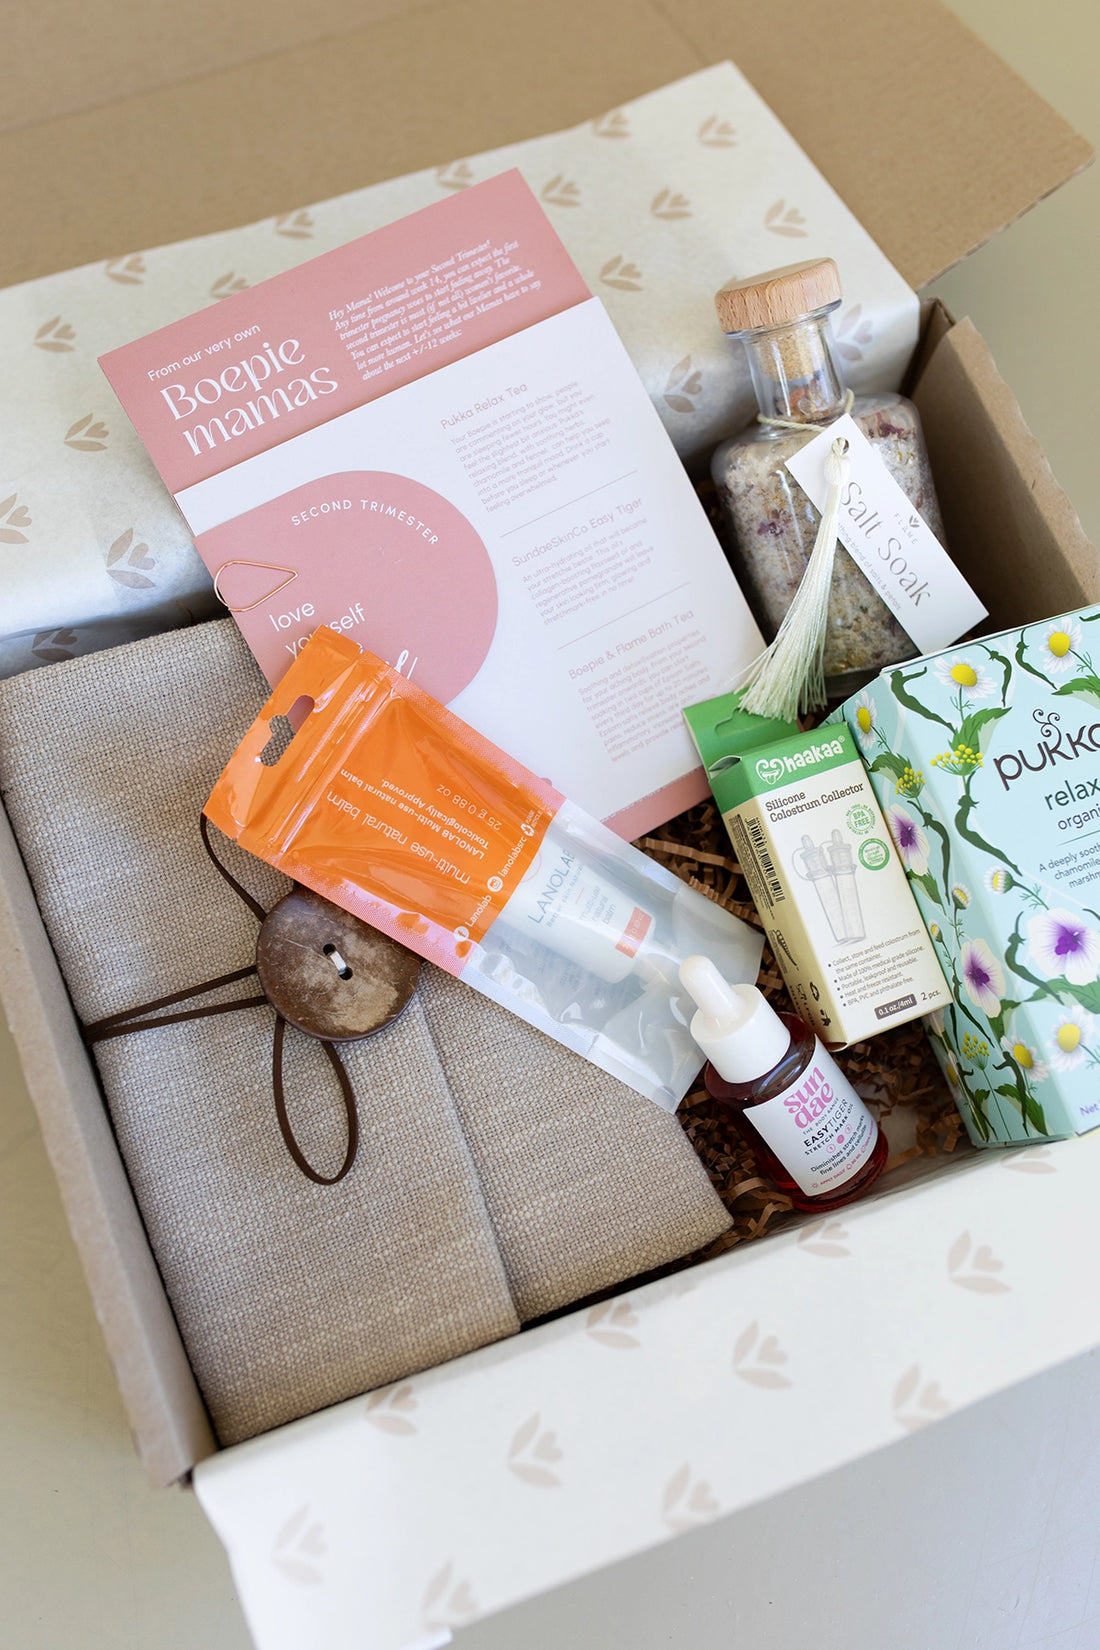 Second Trimester Box - Love yourself a little more